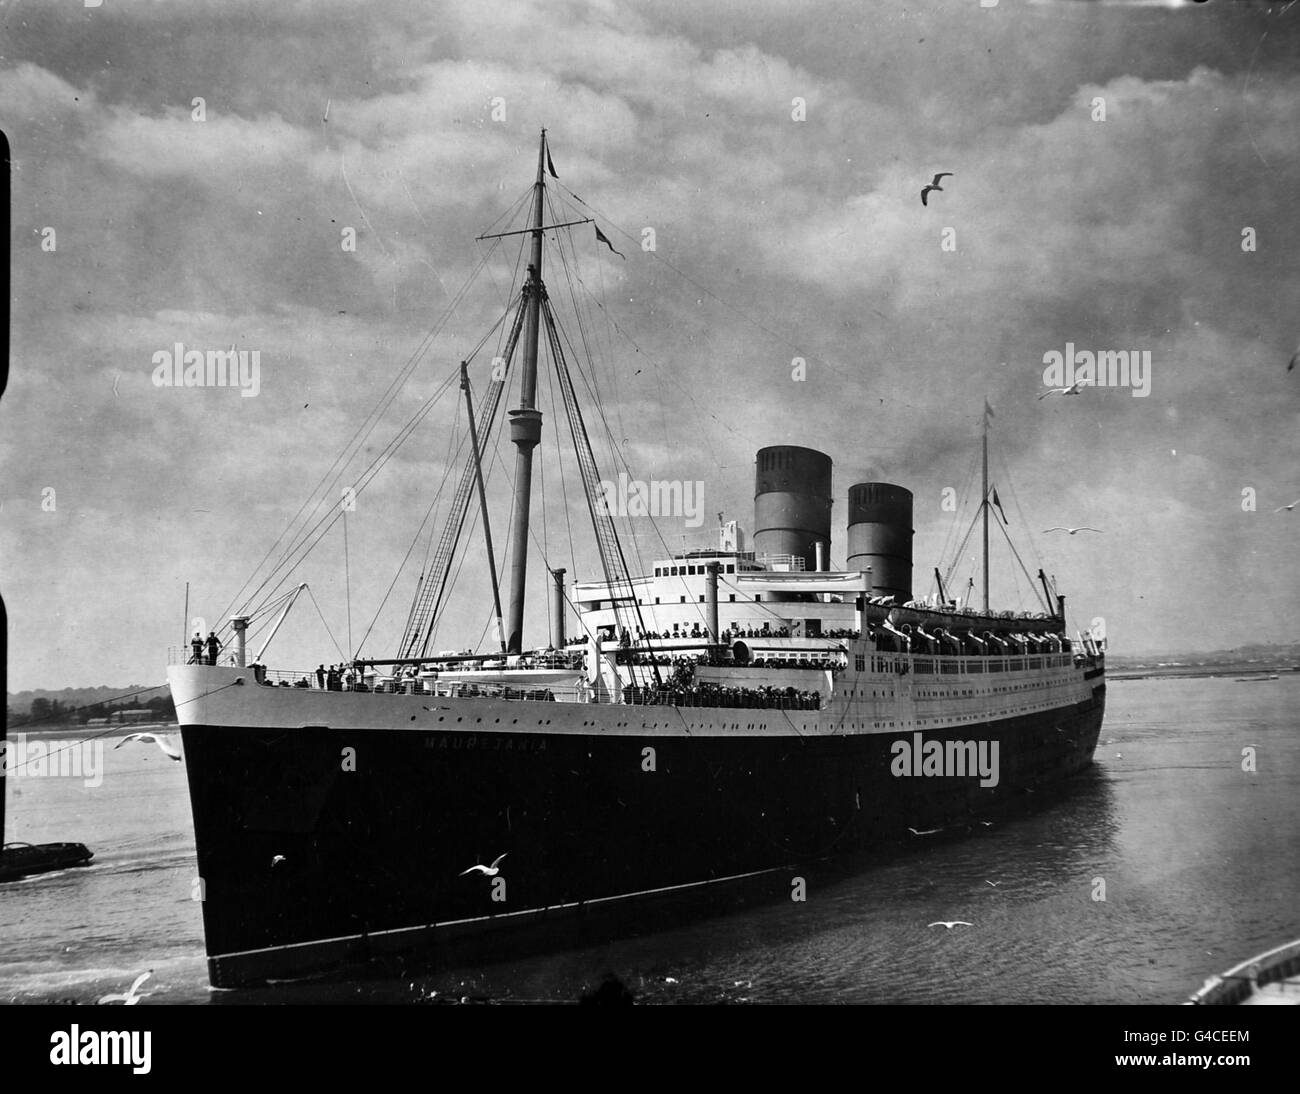 Cammell lairds Black and White Stock Photos & Images - Alamy